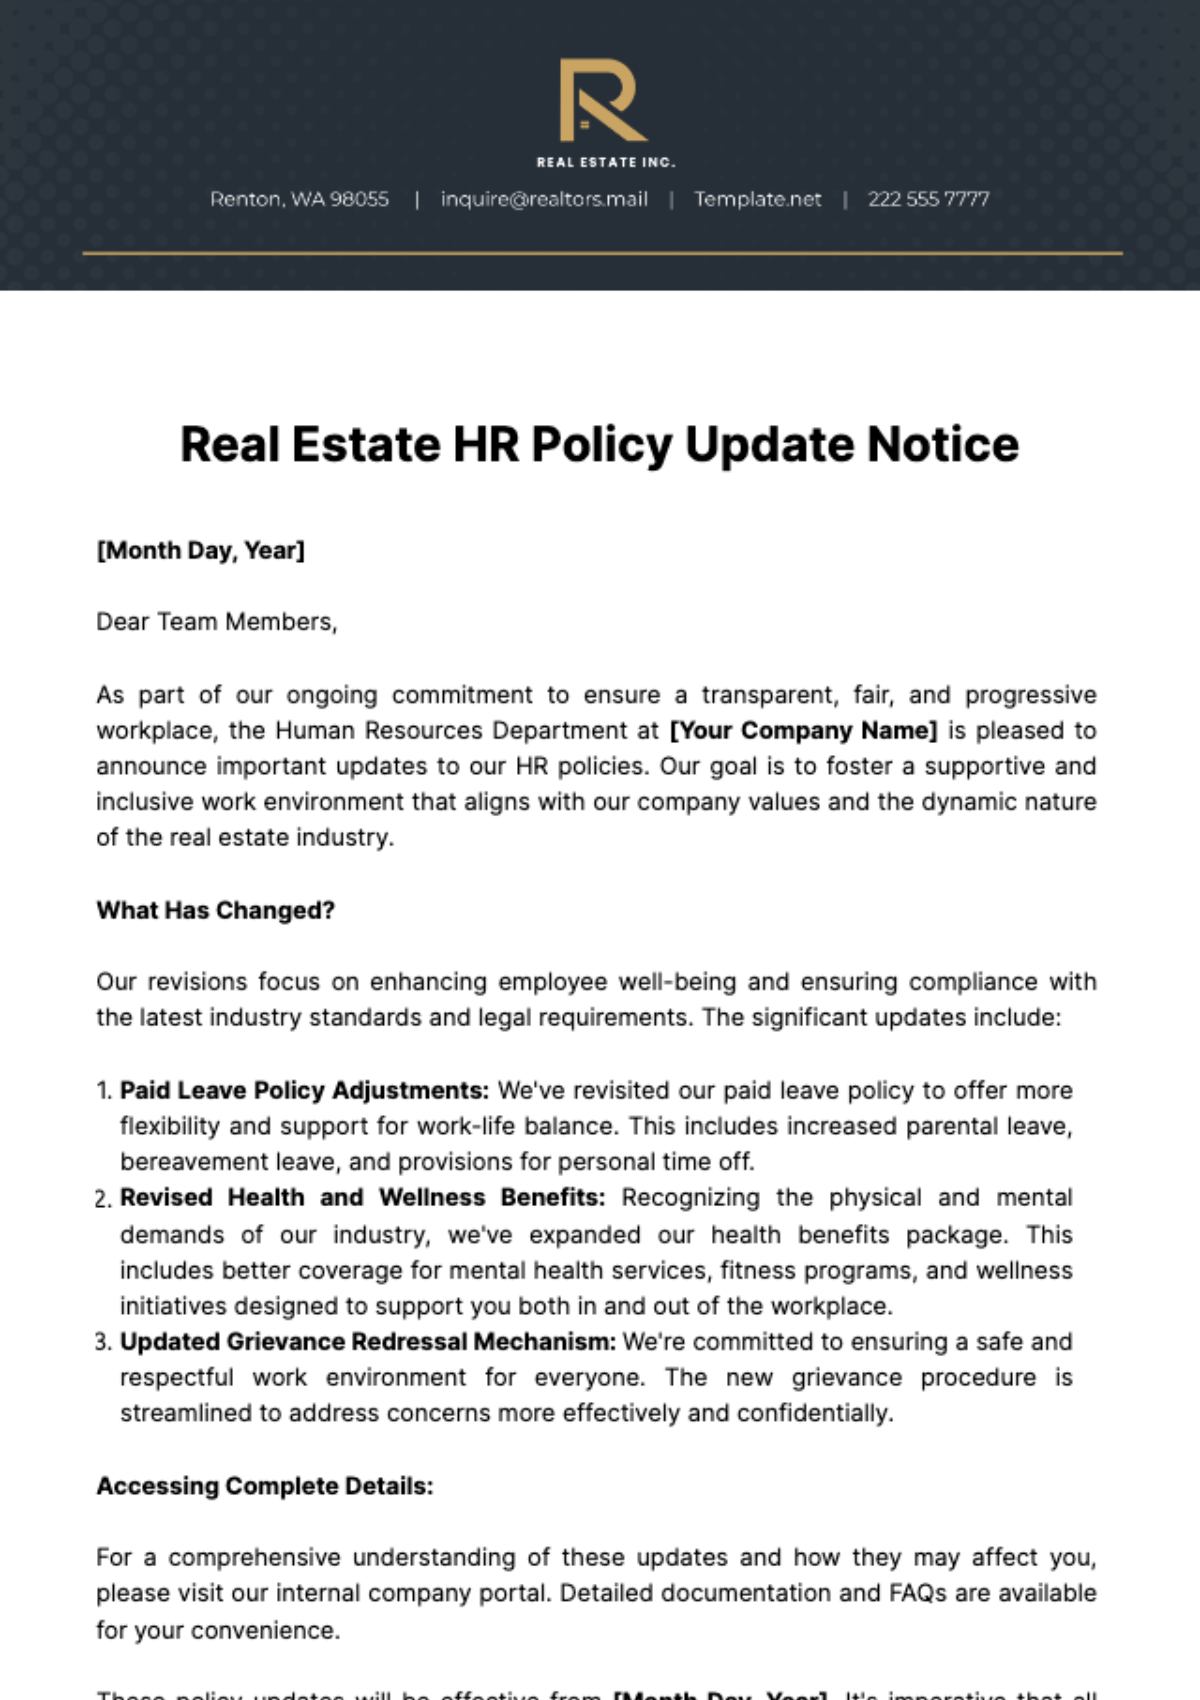 Free Real Estate HR Policy Update Notice Template